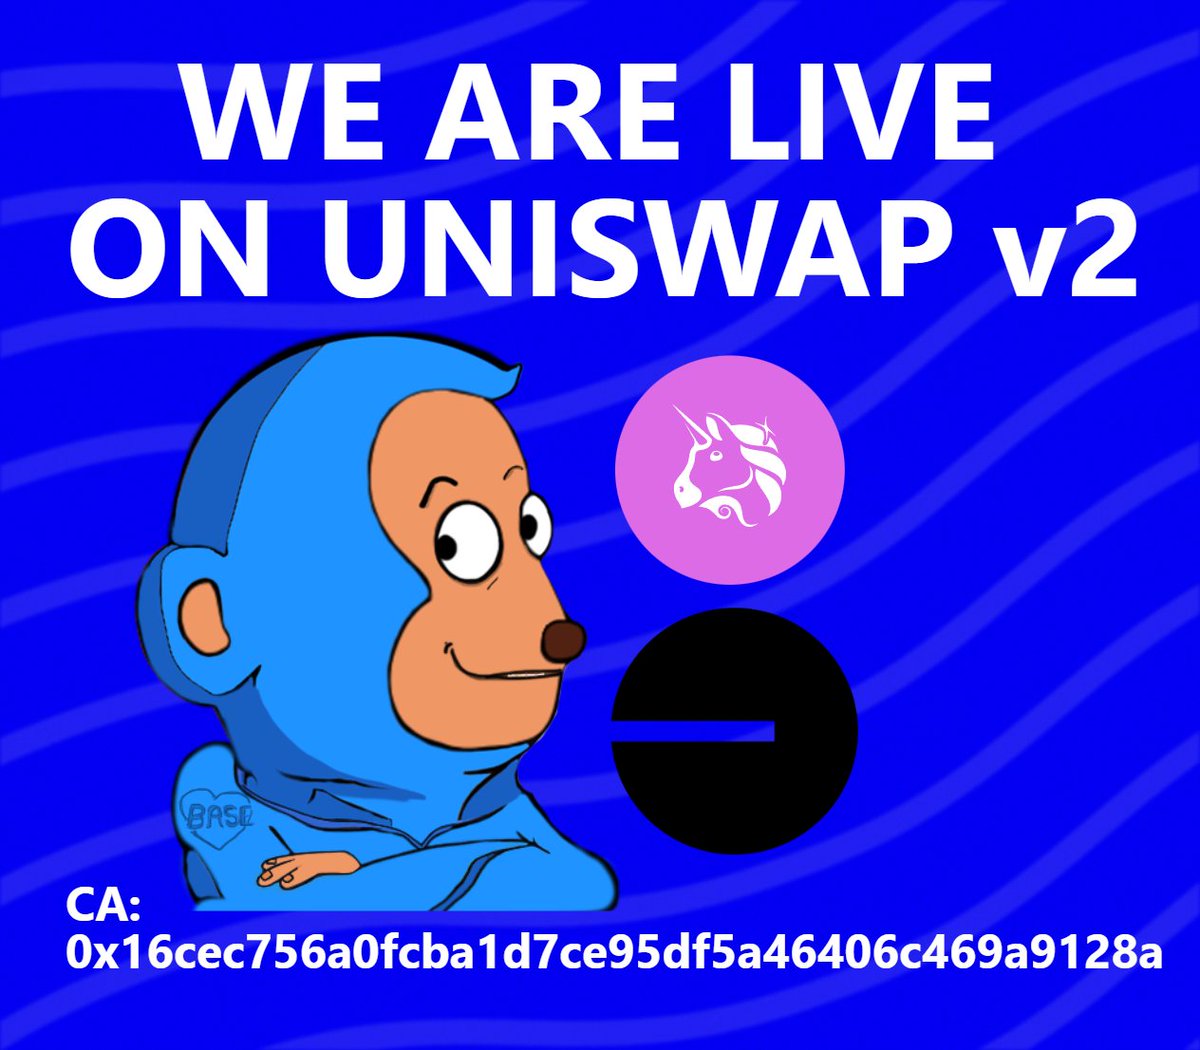 Here we go, the AWK Token is live on Uniswap V2 🐵🔥

CA: 0x16cec756a0fcba1d7ce95df5a46406c469a9128a

✅ Token contract verified

✅ Team tokens locked 365 days

✅ Contract renounced

🔥 0.69% of each Transfer will be burned directly!

#base #meme #awkwardmonkey #memecoin